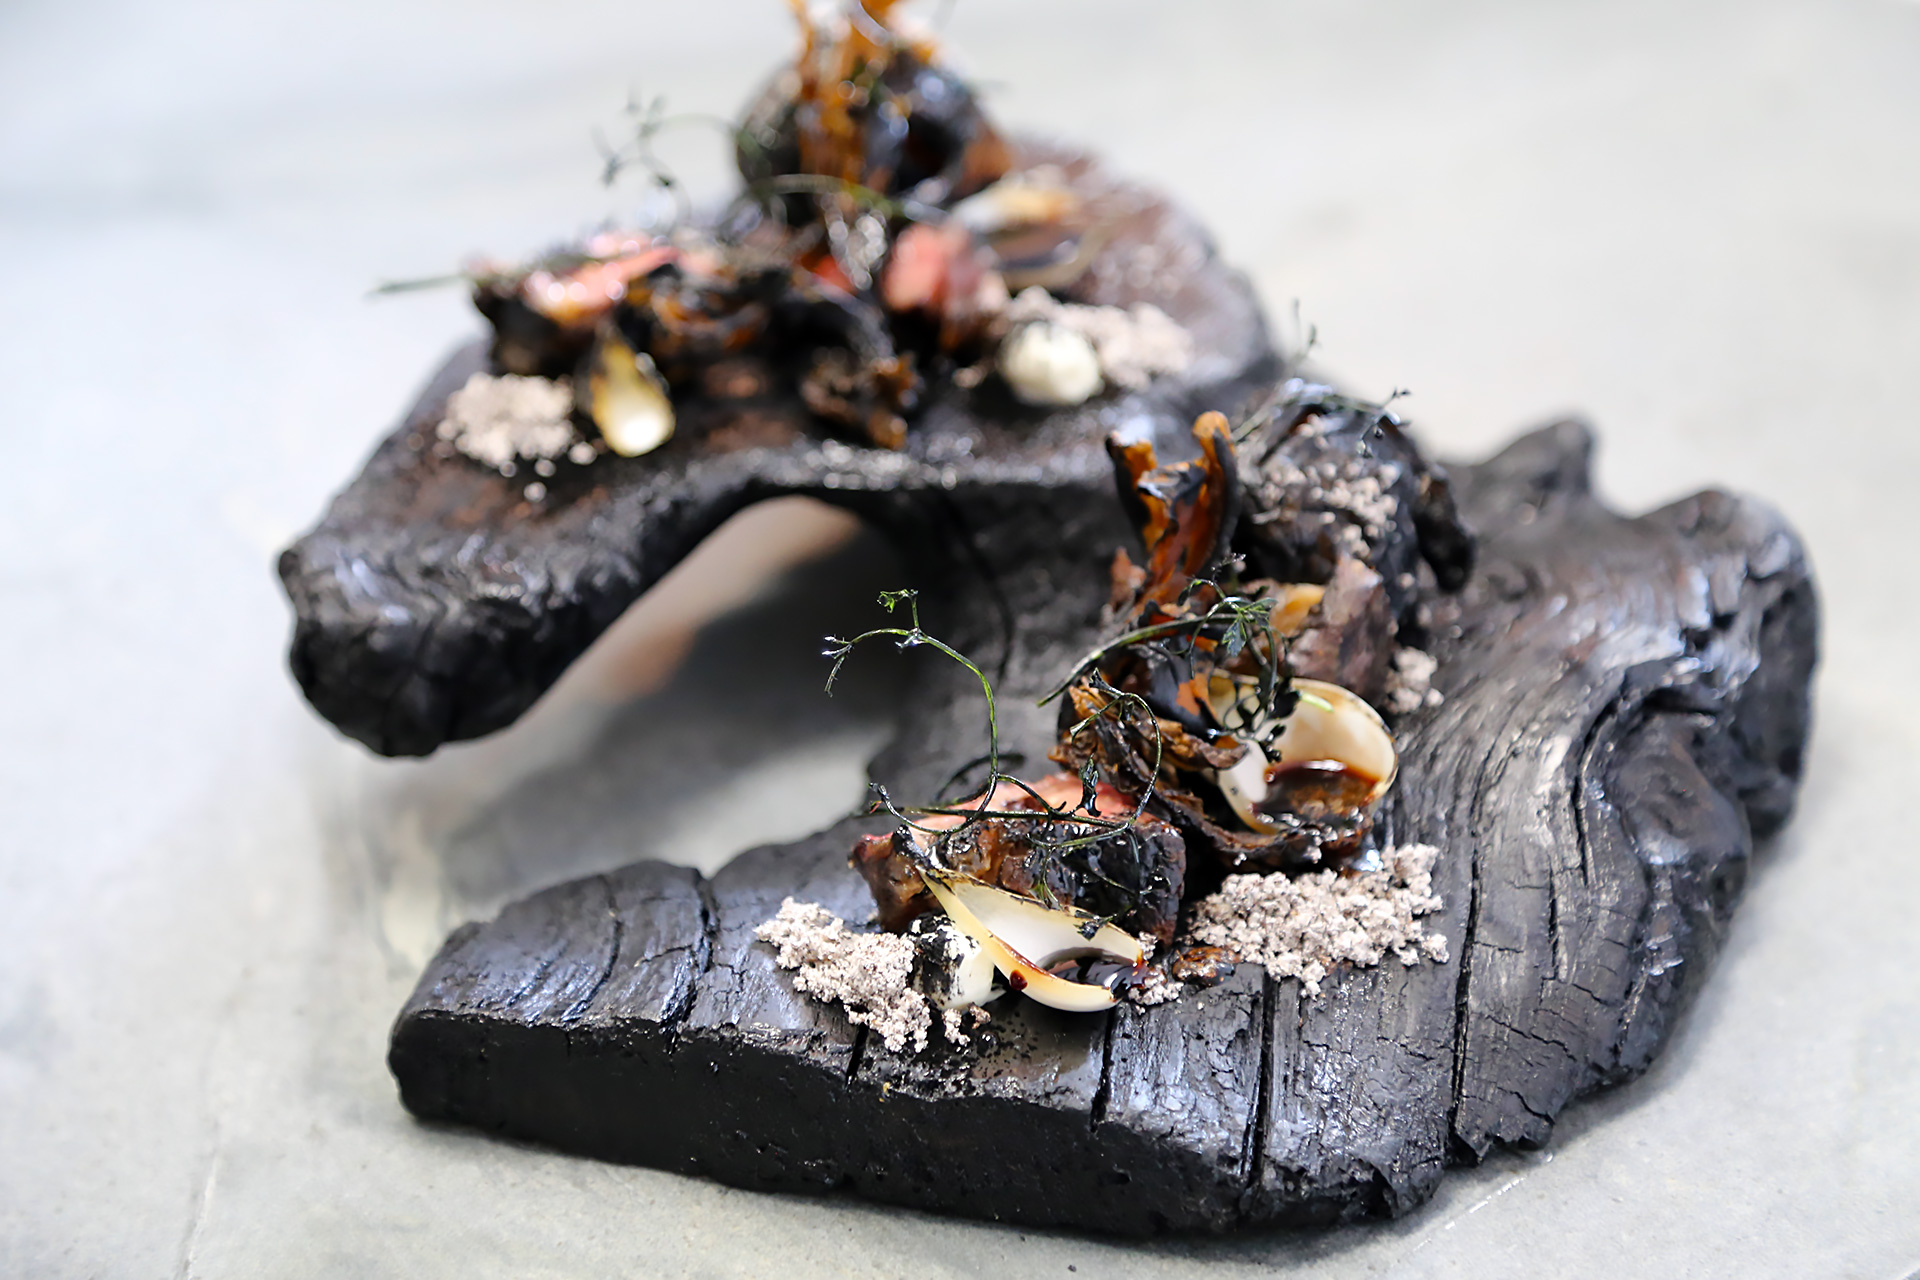 One “Elements” course called “Fire” centers on charcoal-grilled dry-aged New York steak, offset by charred pearl onions, crispy maitake mushrooms, leek ash and sunchoke “coal.”